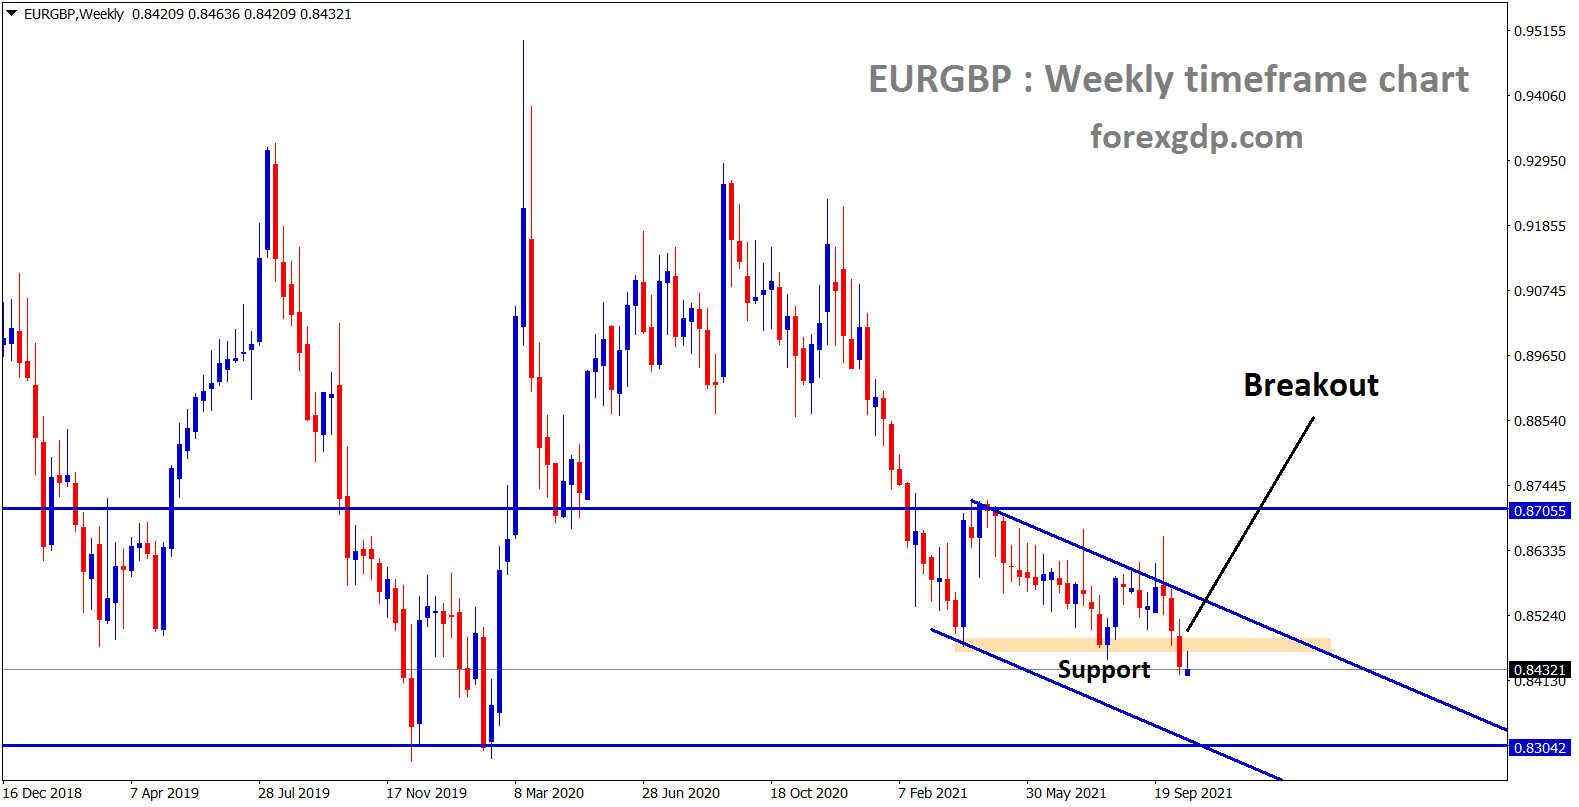 EURGBP is moving in a strong downtrend breaking the recent support areas